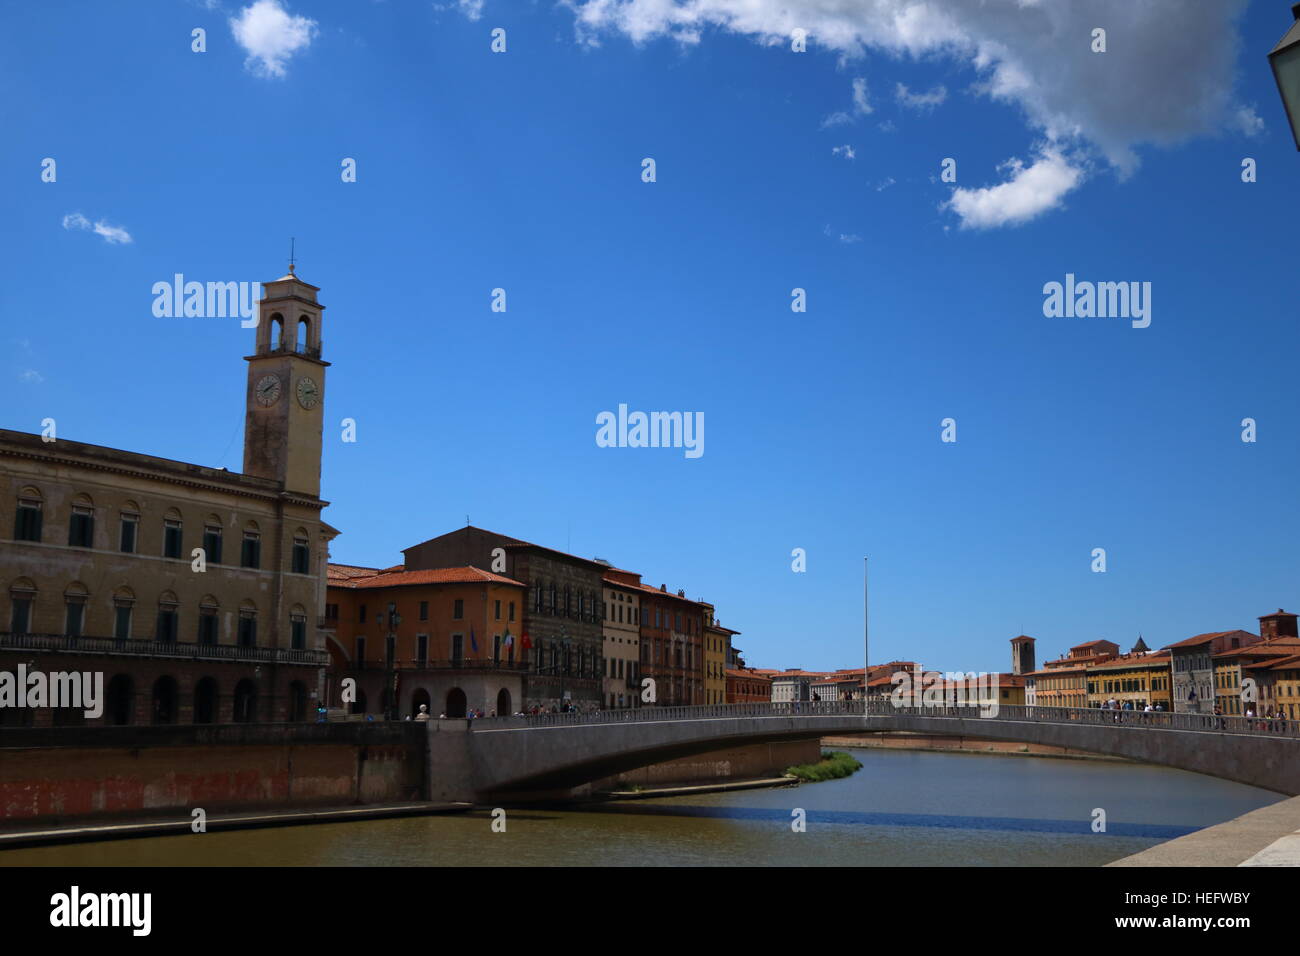 The river side in Pisa, Italy Stock Photo